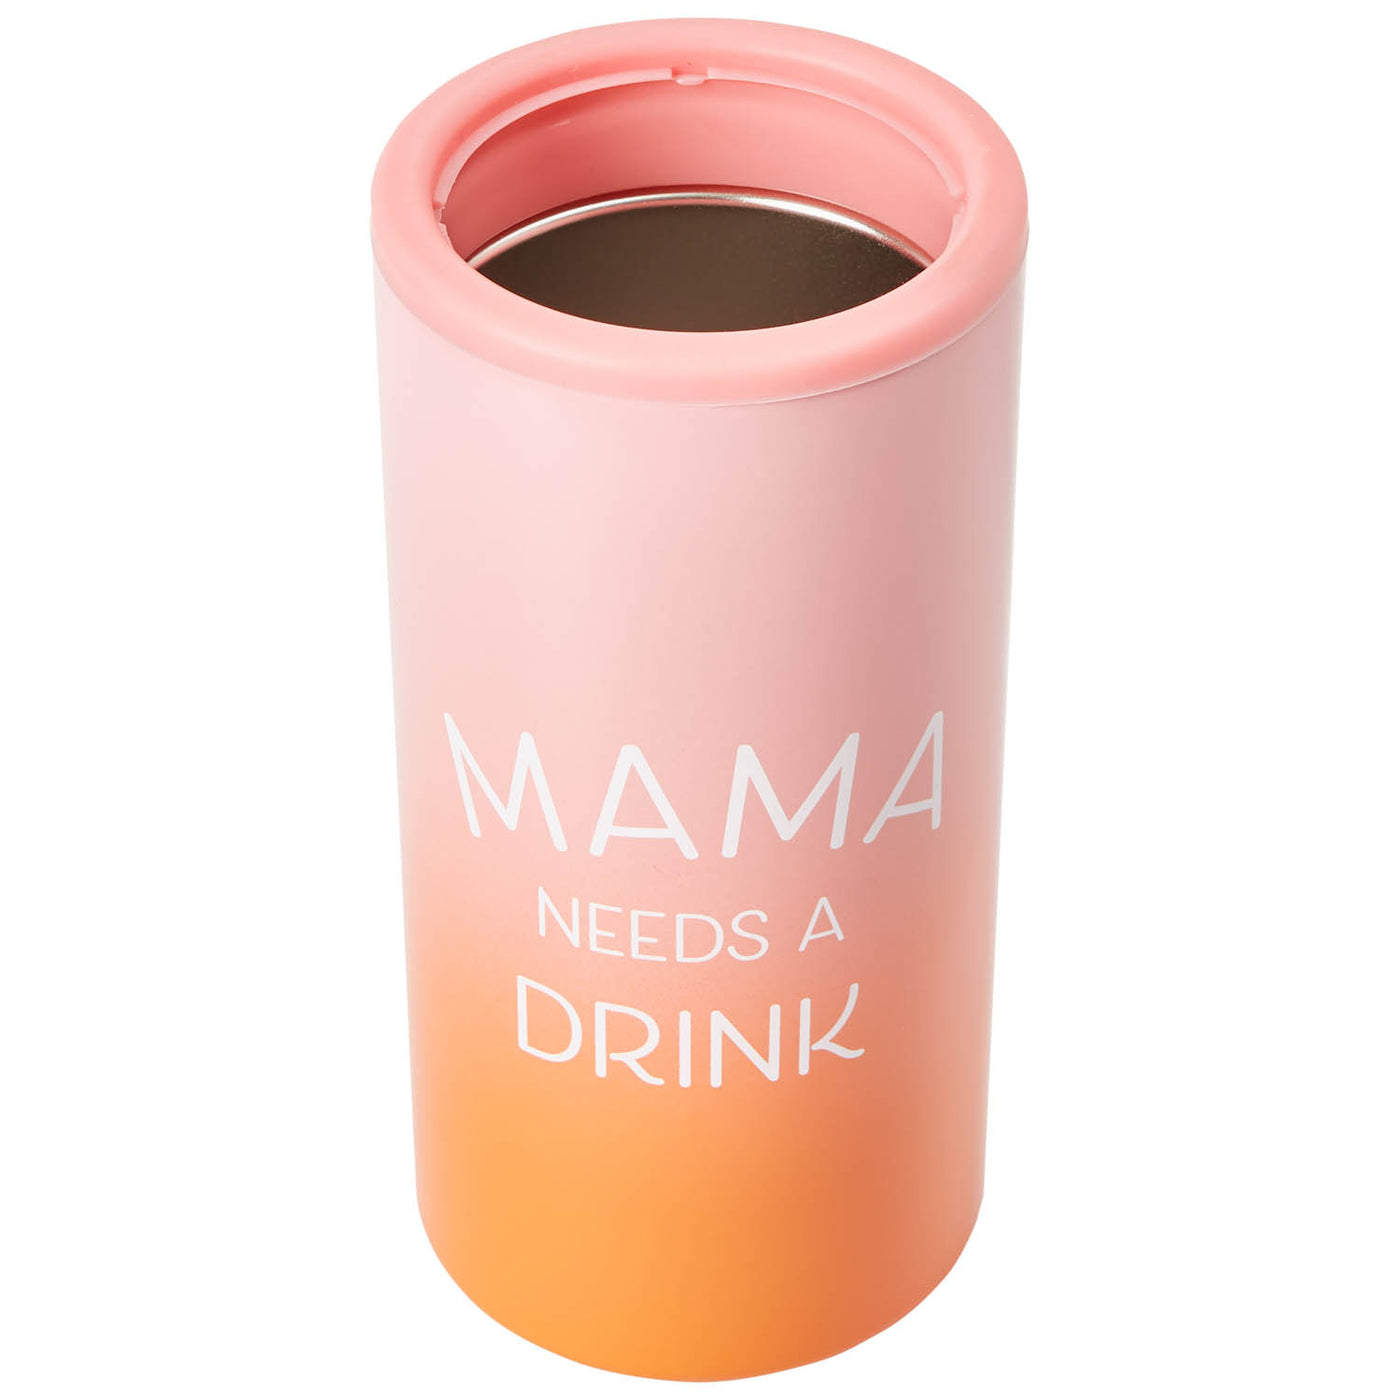 Slim can cooler reads mama needs a drink